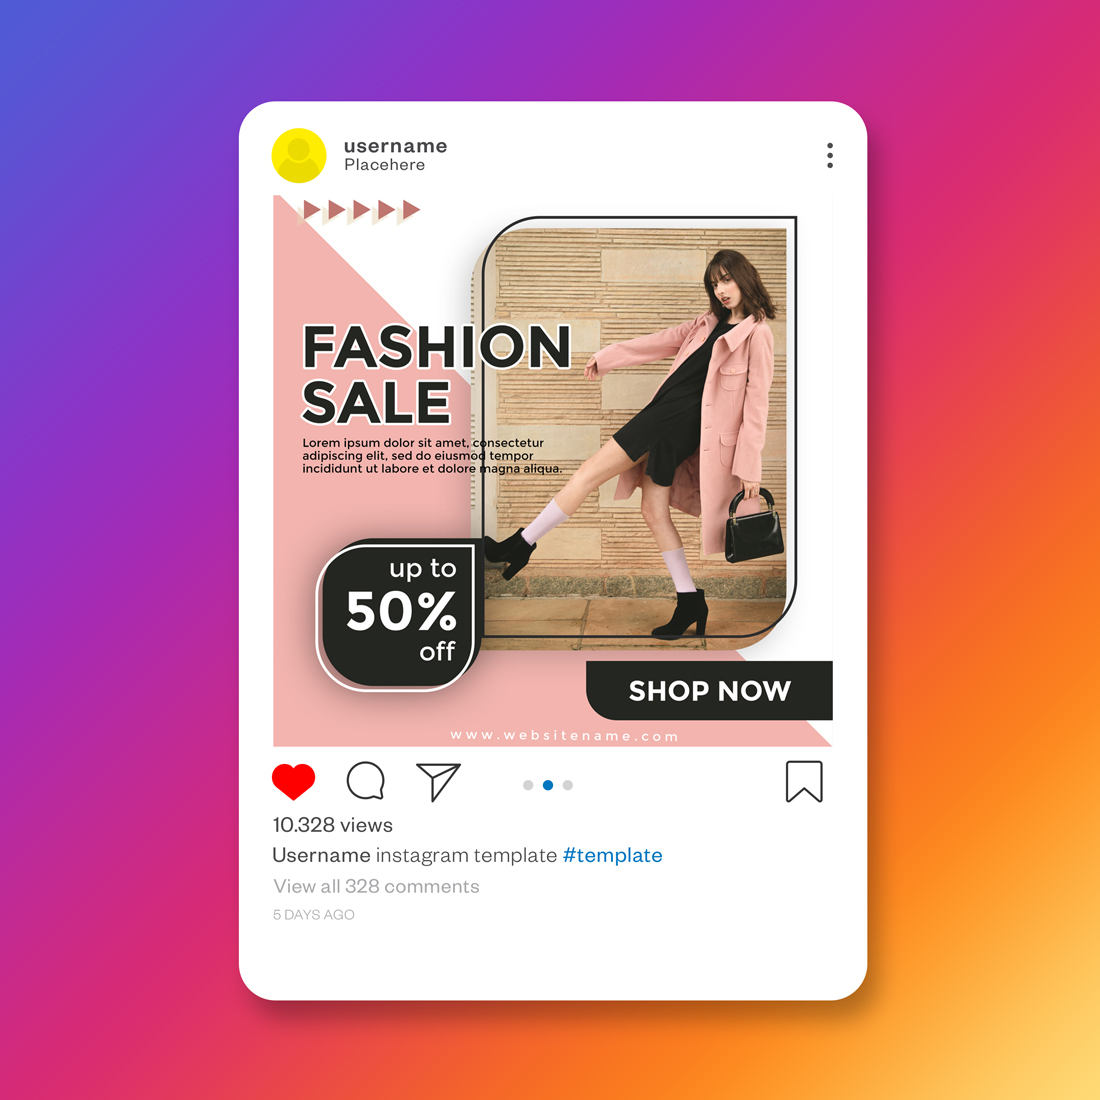 Fashion Style Social Media Post Templates cover image.